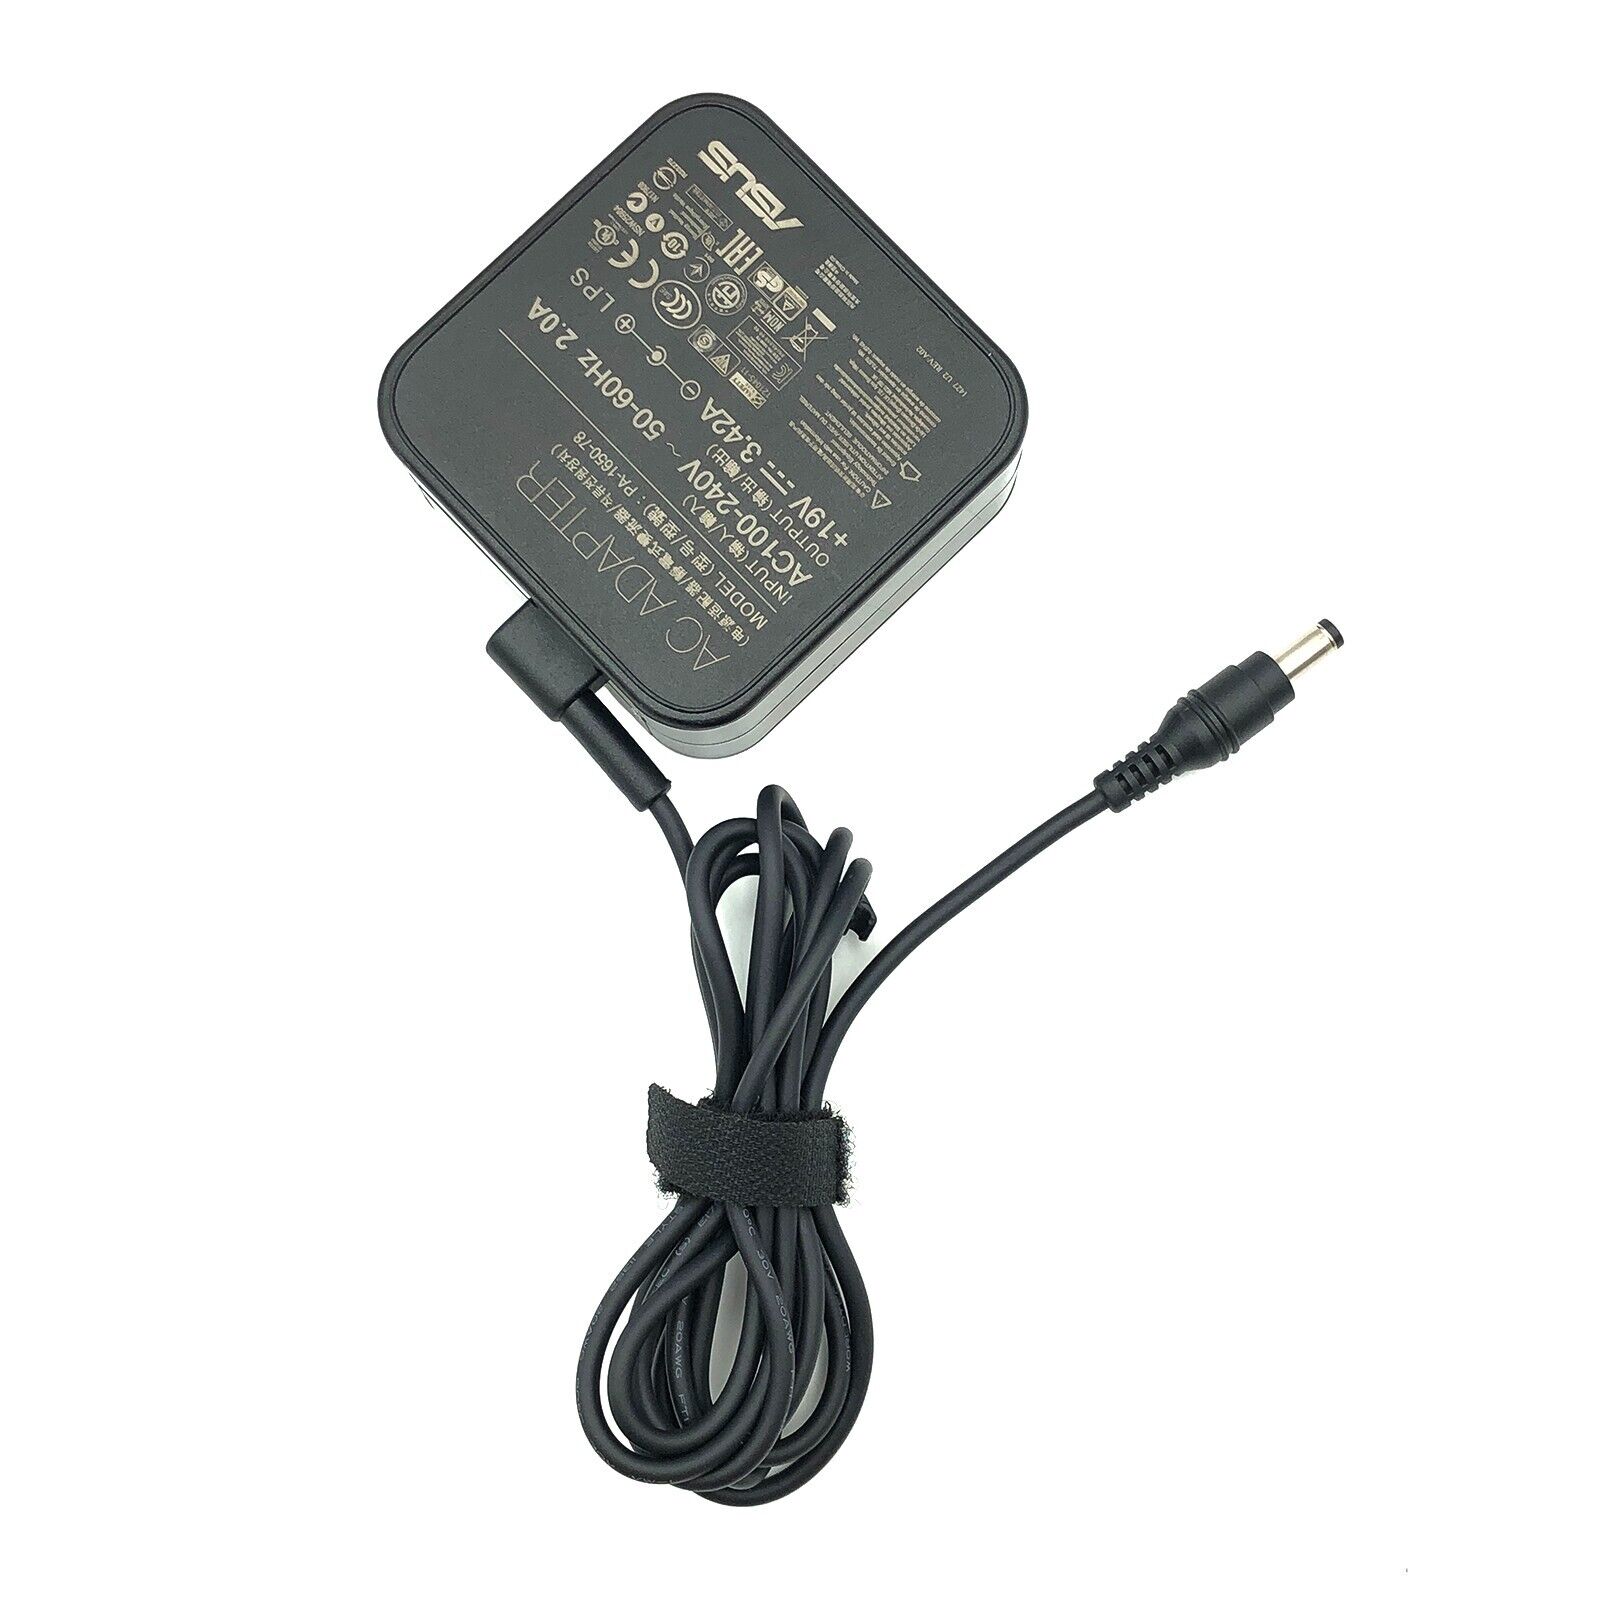 Genuine 65W Asus AC DC Adapter for LS246H MX279H VX239H VX278H VX279H Monitor